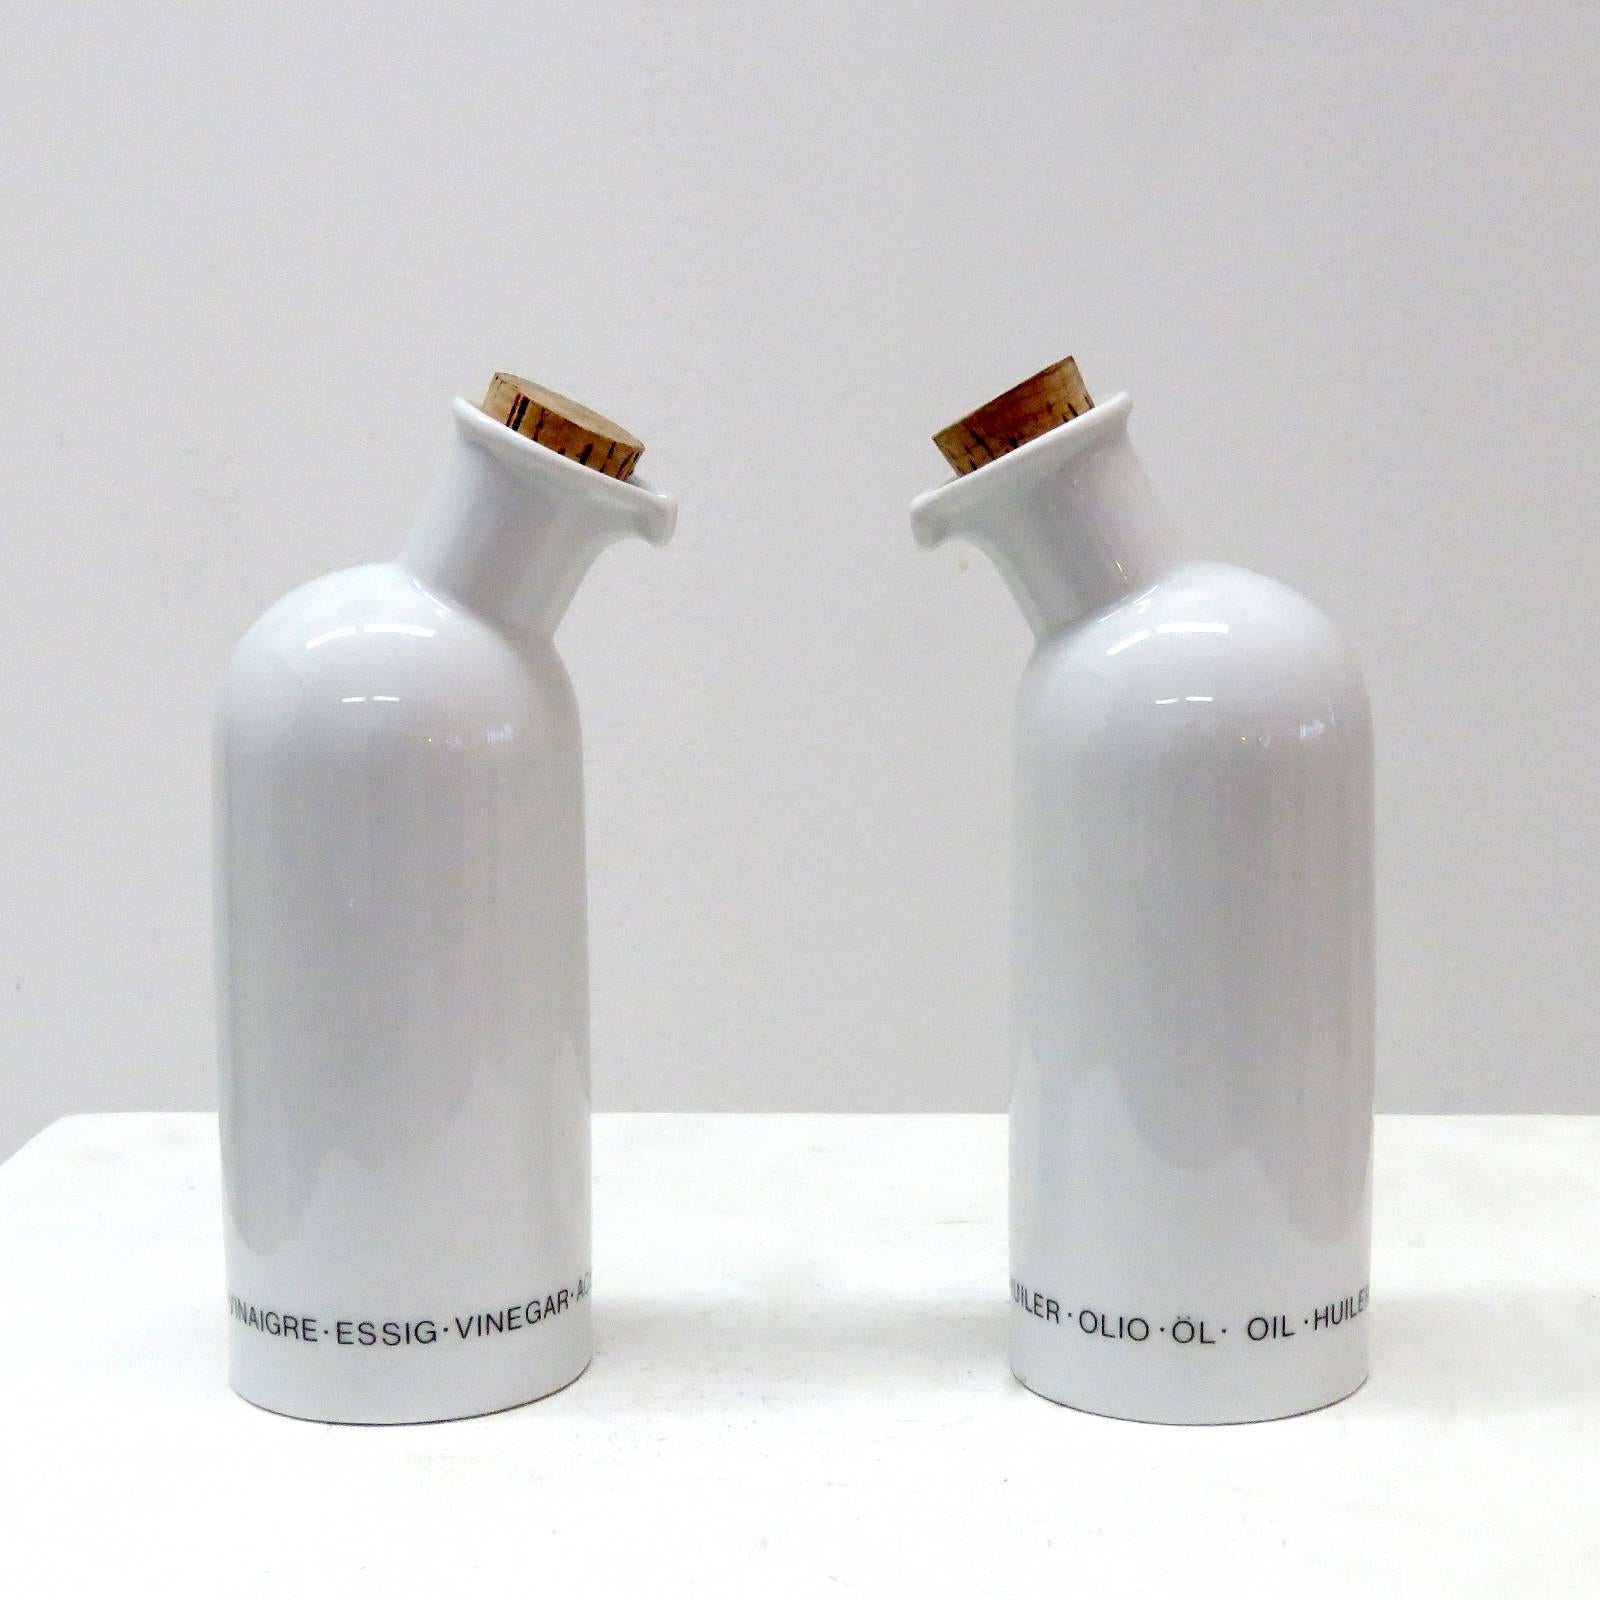 Wonderful white porcelain oil and vinegar serving bottles by Arzberg, Germany with cork caps, multilingual signage, marked.